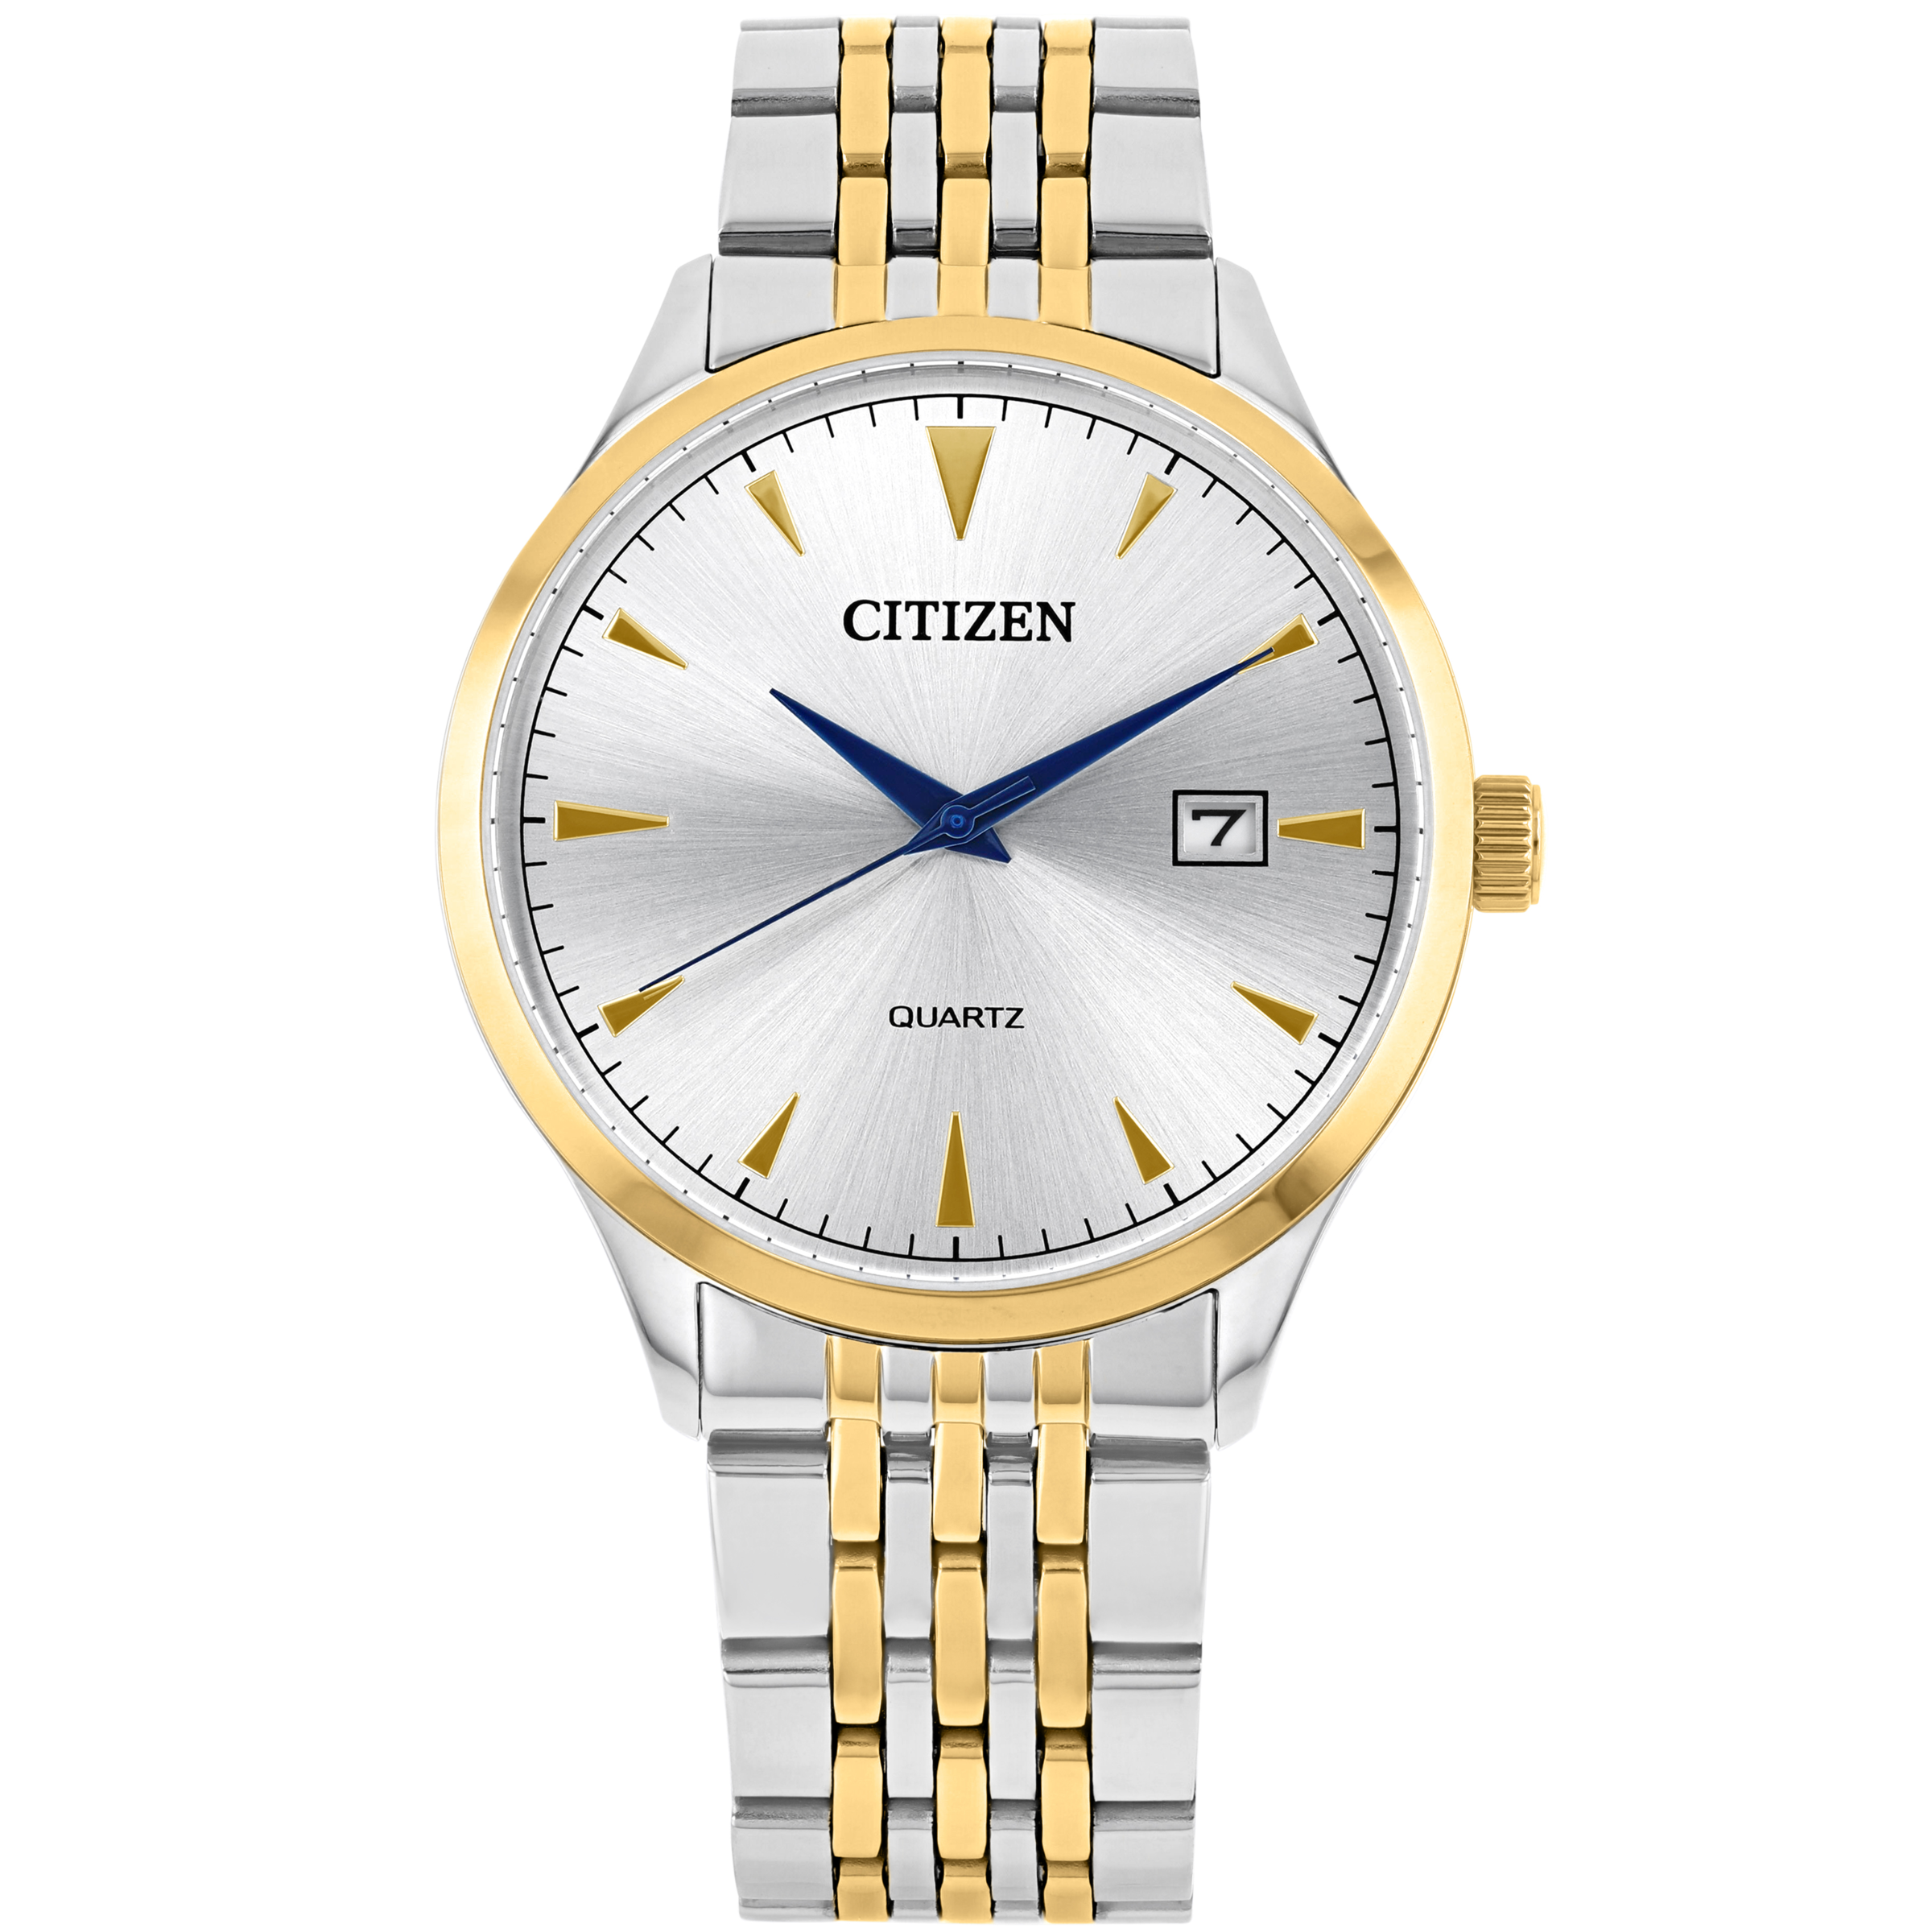 CITIZEN DZ0064-52A ANALOG STAINLESS STEEL WATCH FOR MEN